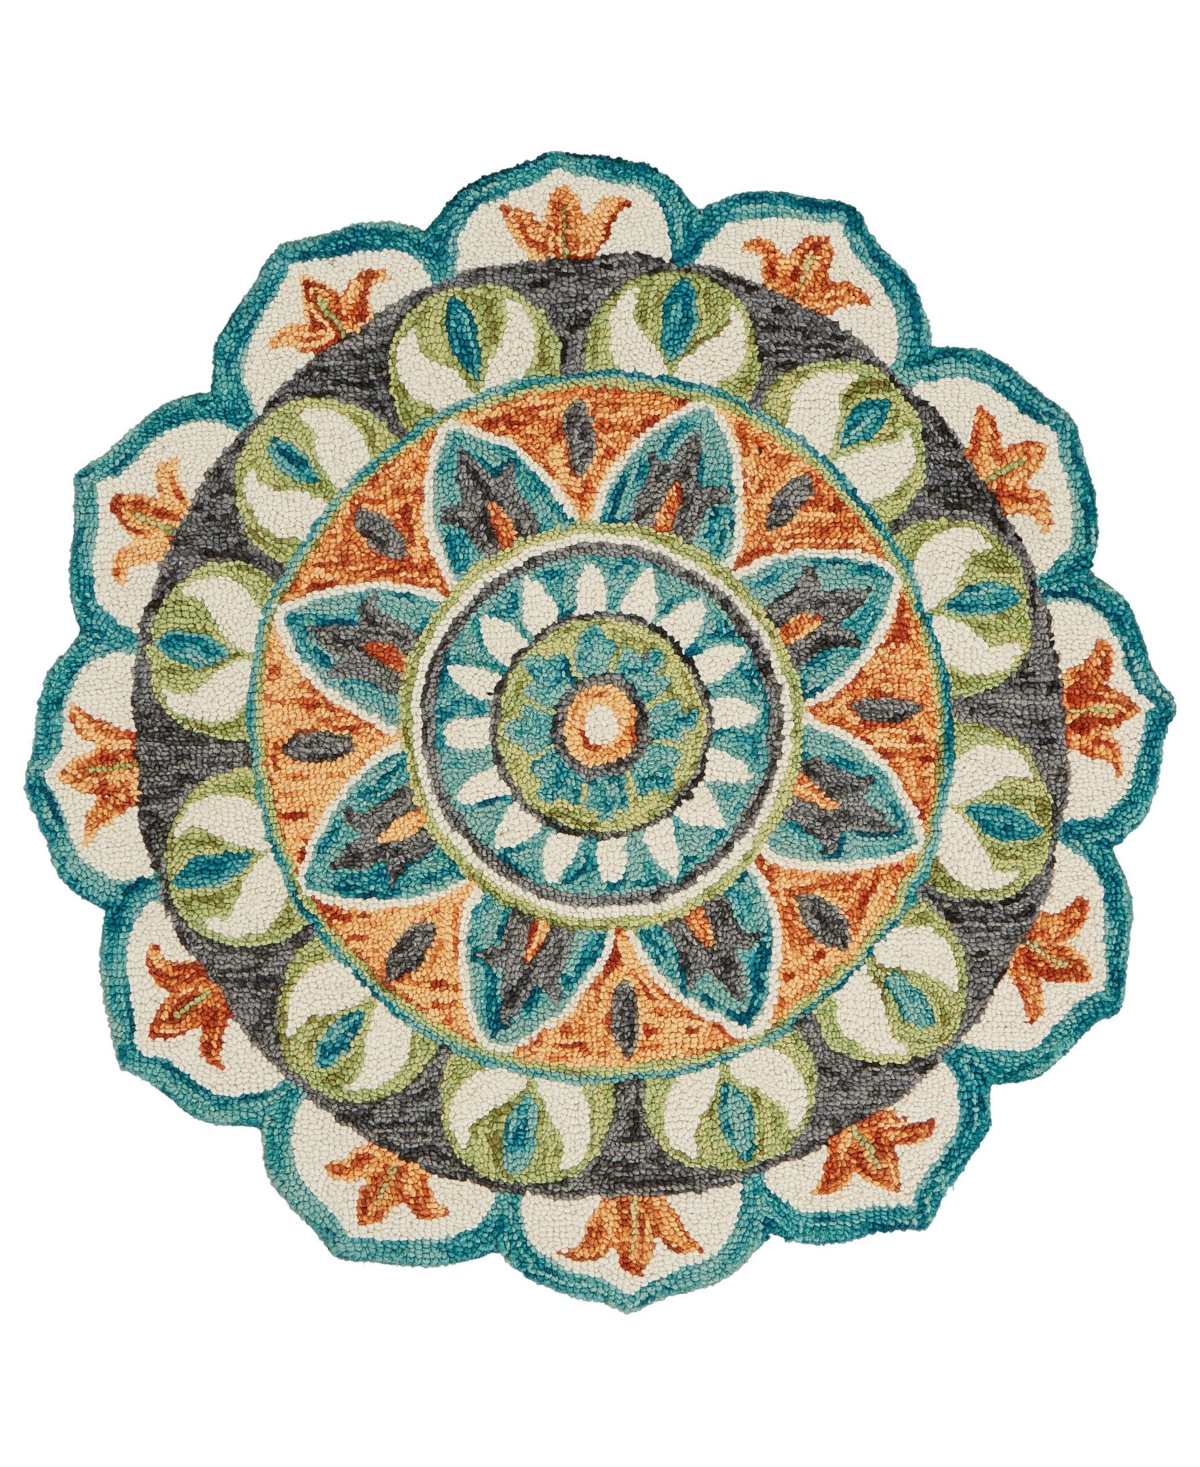 Lr Home Radiance Rdc54085 6' X 6' Round Area Rug In Teal,green